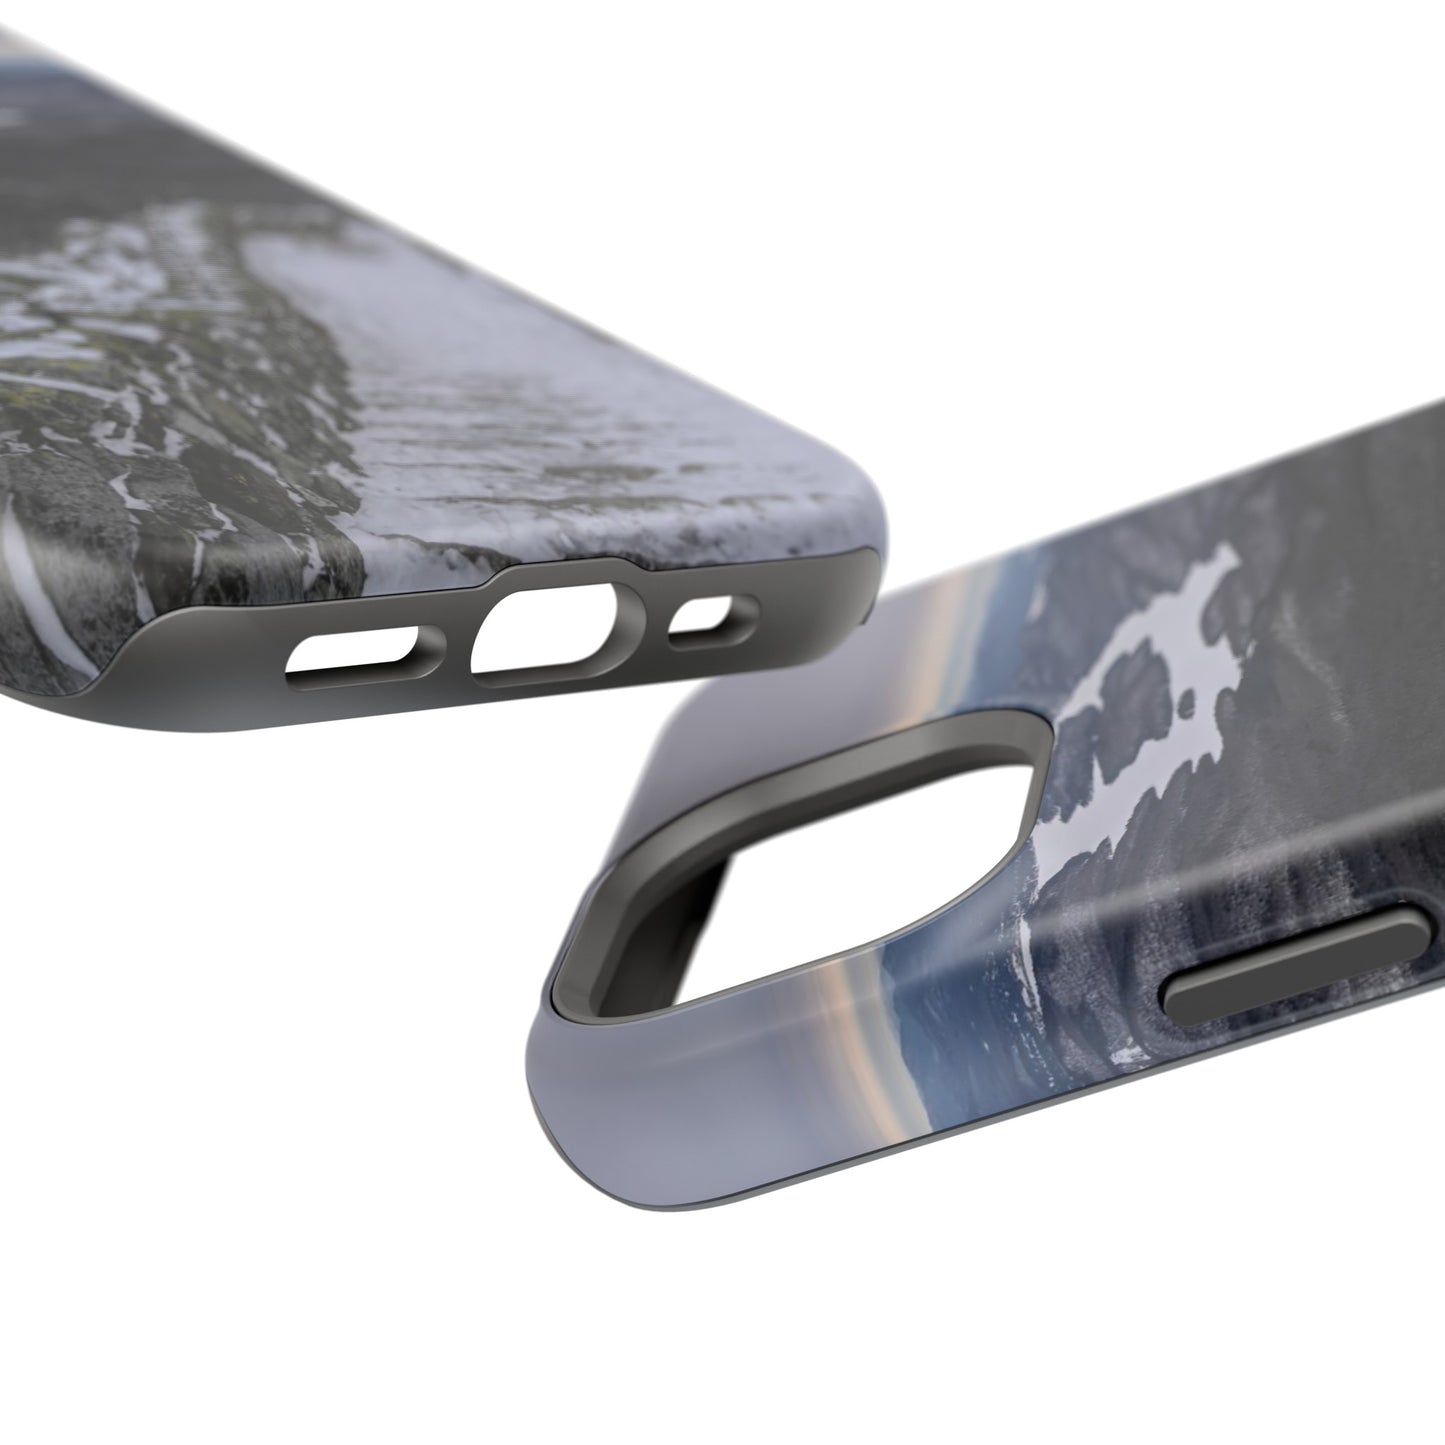 MagSafe Impact Resistant Phone Case - Lake Placid View, Whiteface